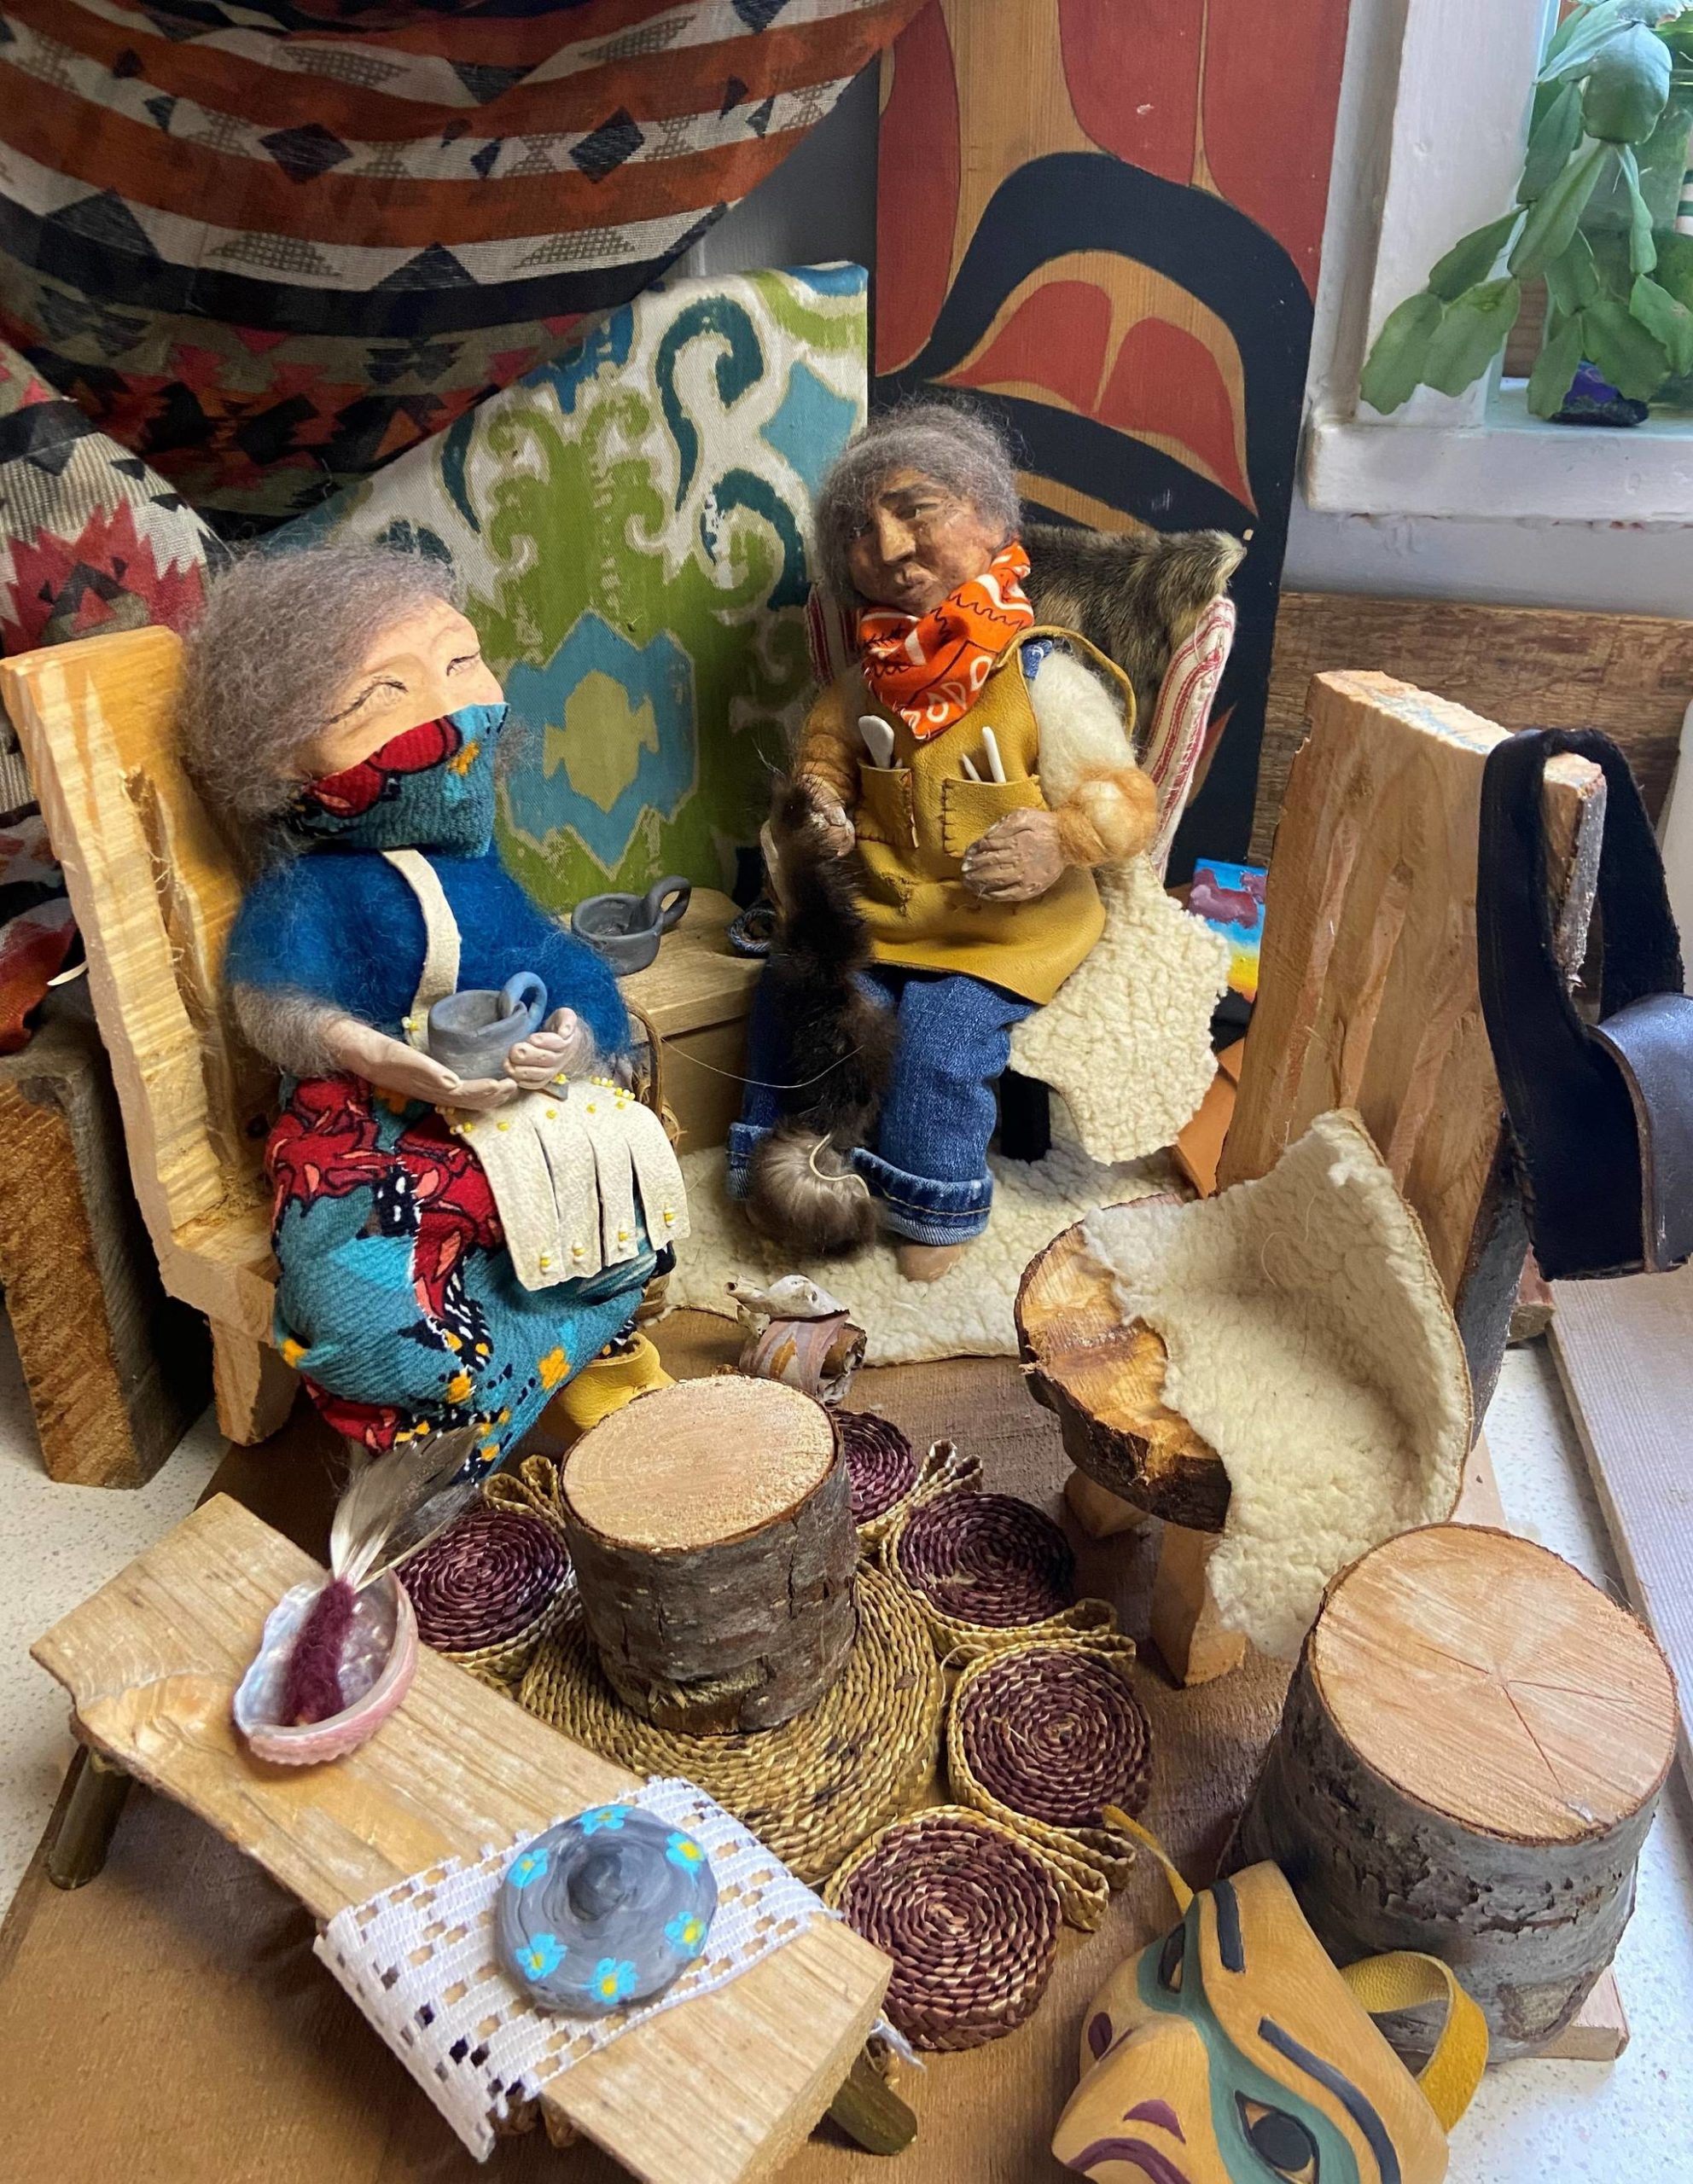 This photo shows diorama and doll art created by Kristina Cranston in Sitka. Dolls wear masks to protect each other from COVID-19. (Courtesy Photo/ Kristina Cranston)